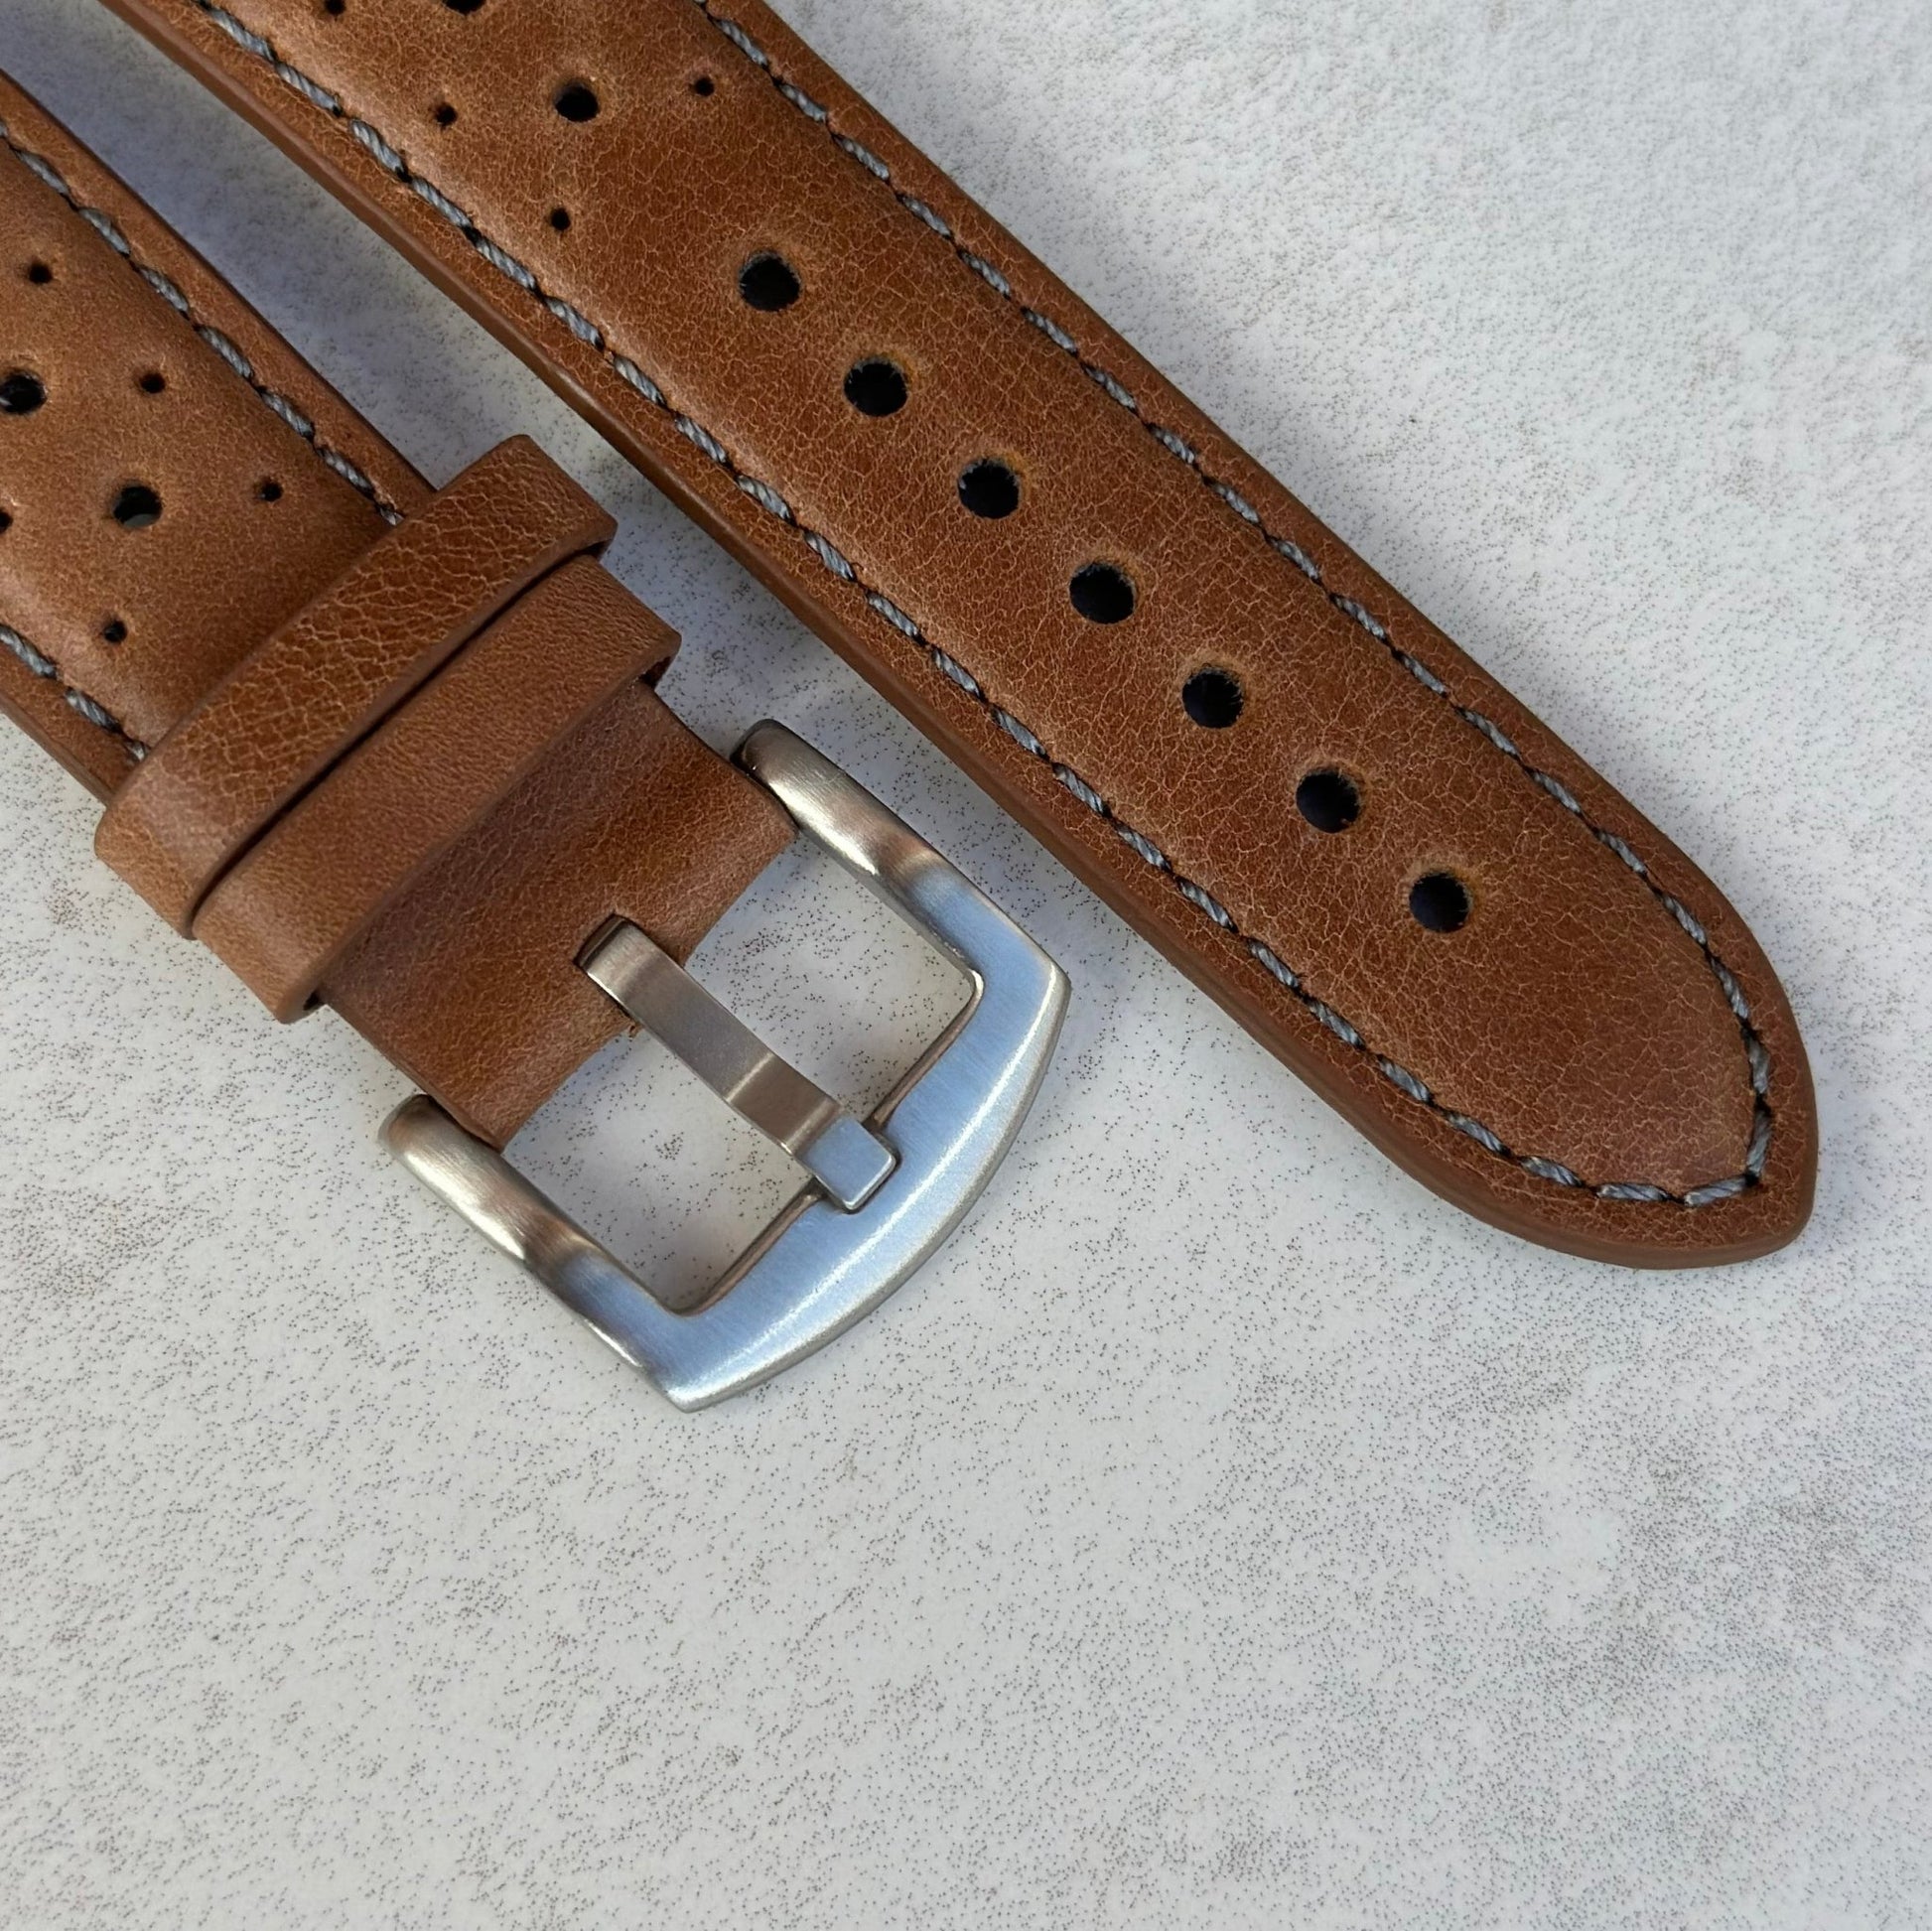 Brushed 316L stainless steel buckle on the Montecarlo tan full grain leather rally strap. Watch And Strap